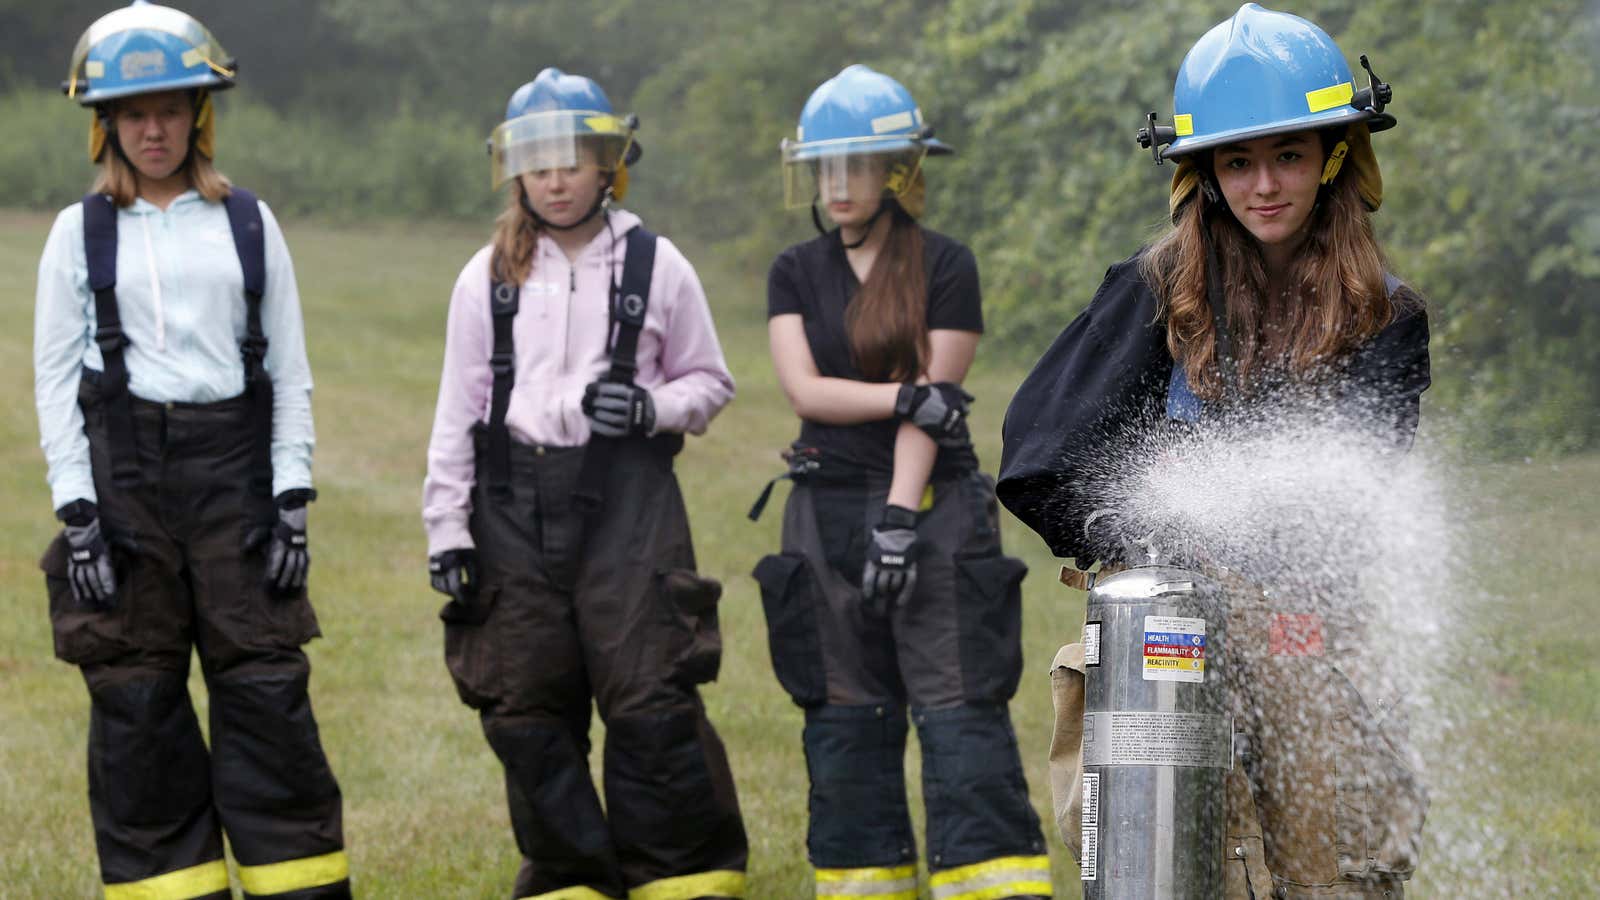 Girls break stereotypes and train to be firefighters at a young age.